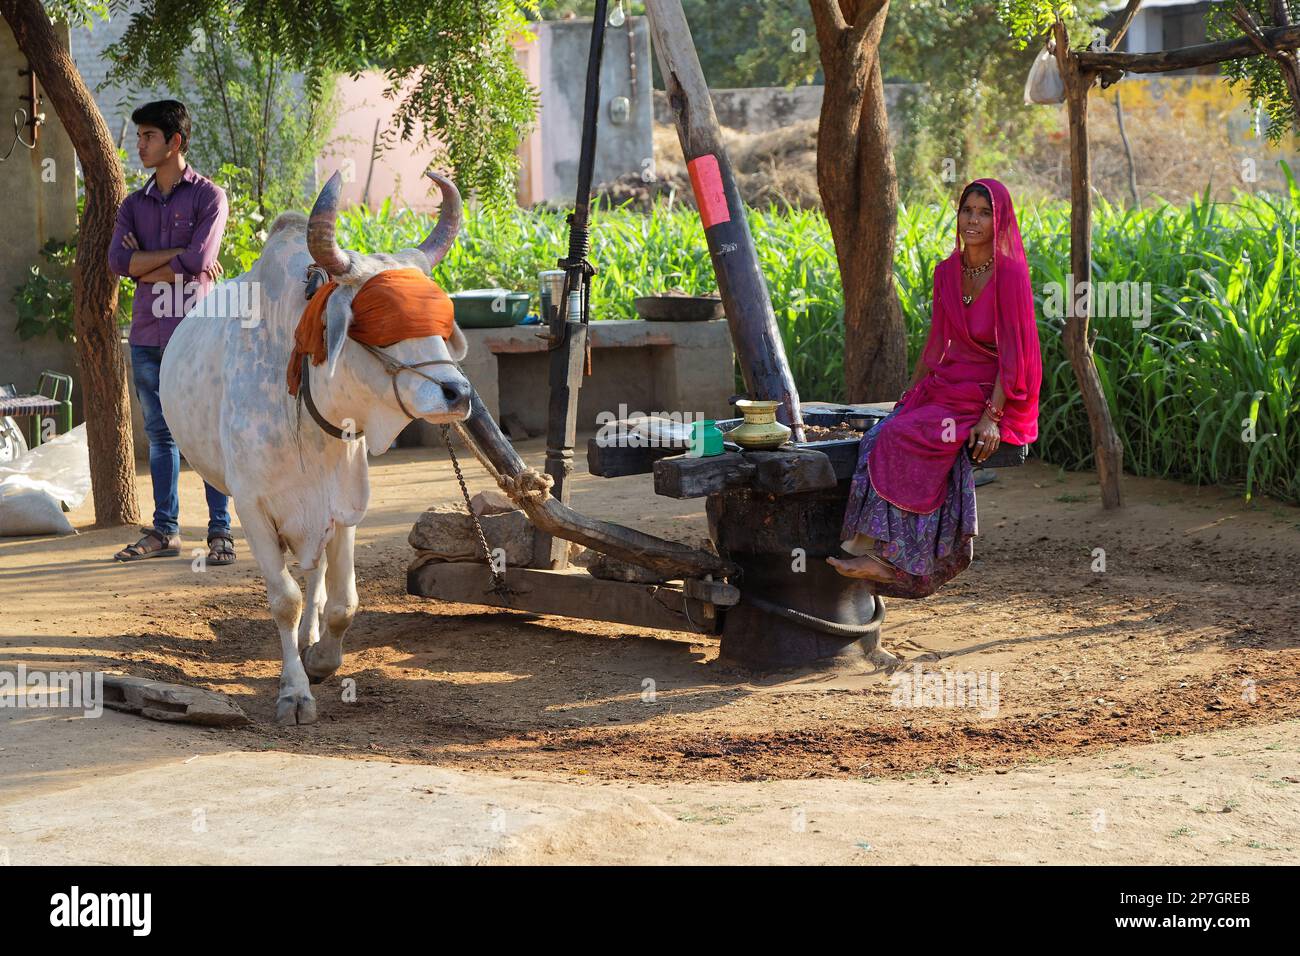 RANAKPUR, INDIA, November 3, 2017 : A noria, also called sakia or Persian Wheel, powered by a cow in the countryside. Stock Photo